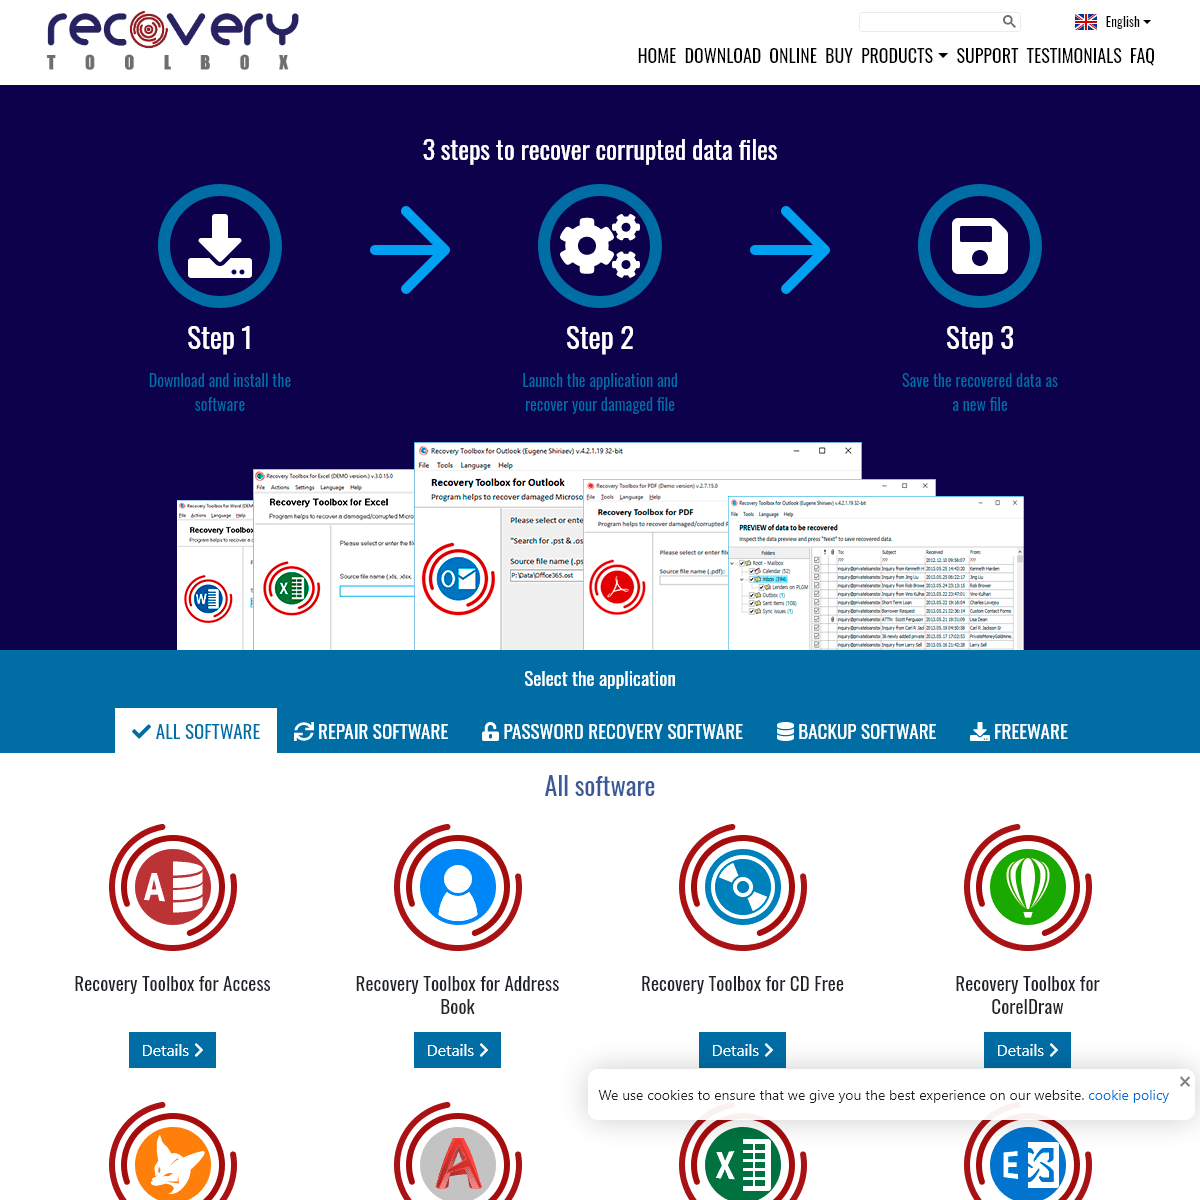 A complete backup of recoverytoolbox.com